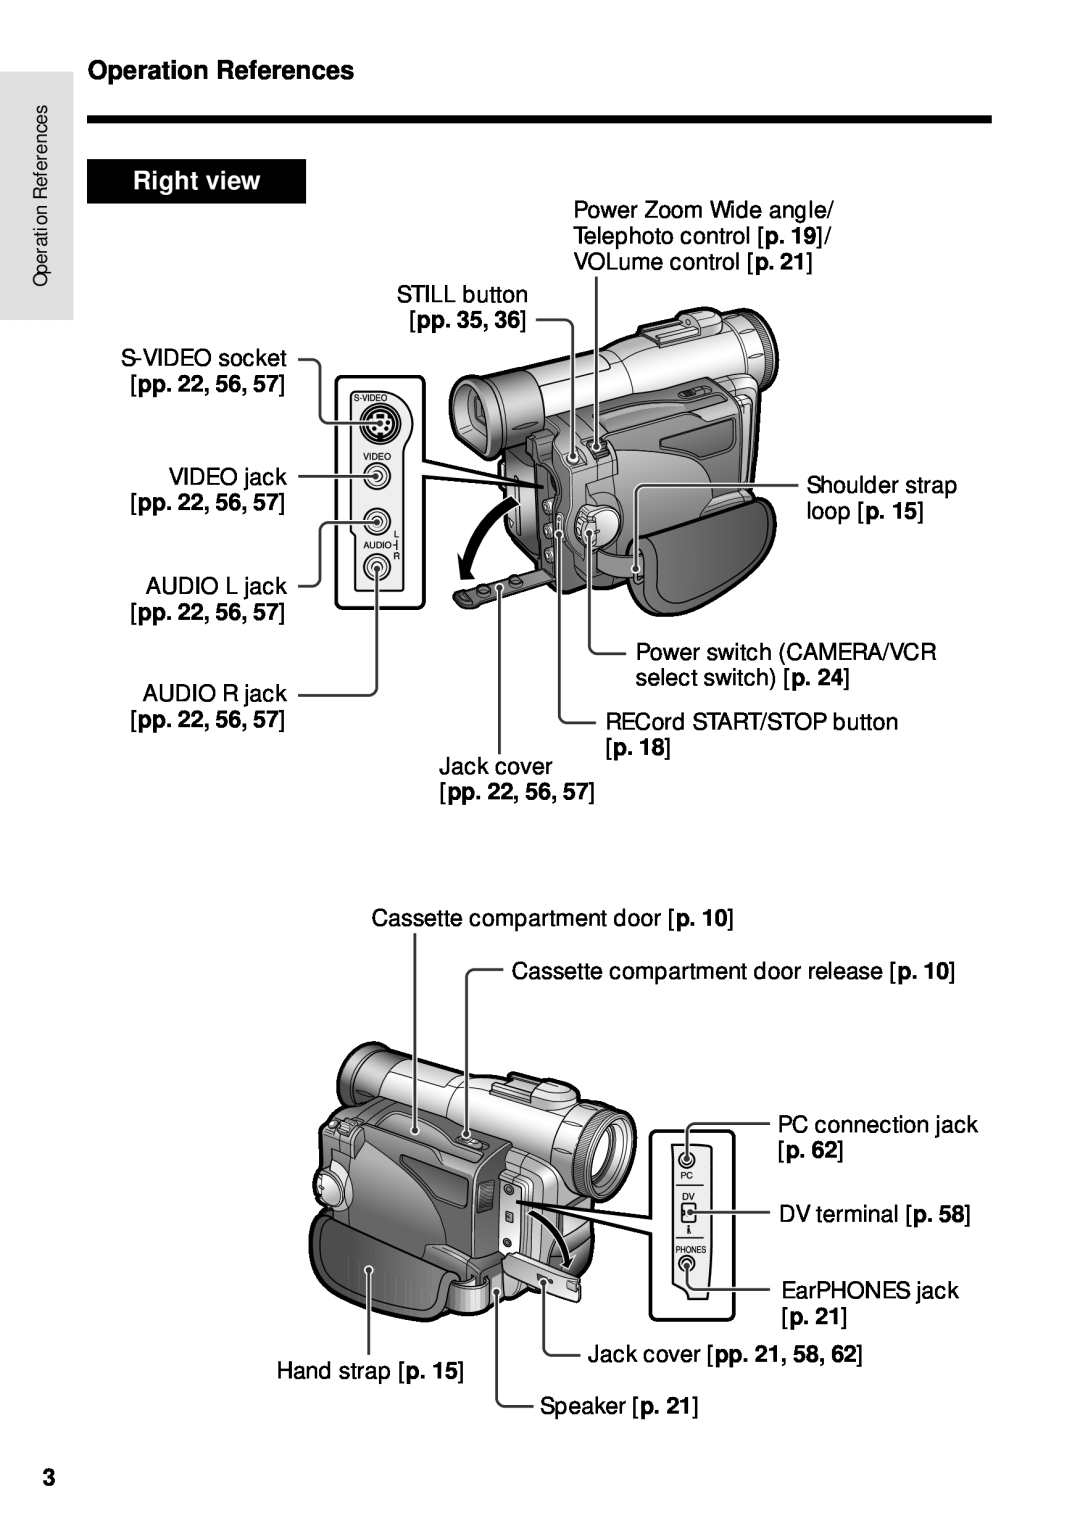 Sharp VL-WD250U operation manual Operation References, Right view, pp. 22, 56, Jack cover pp. 21, 58 